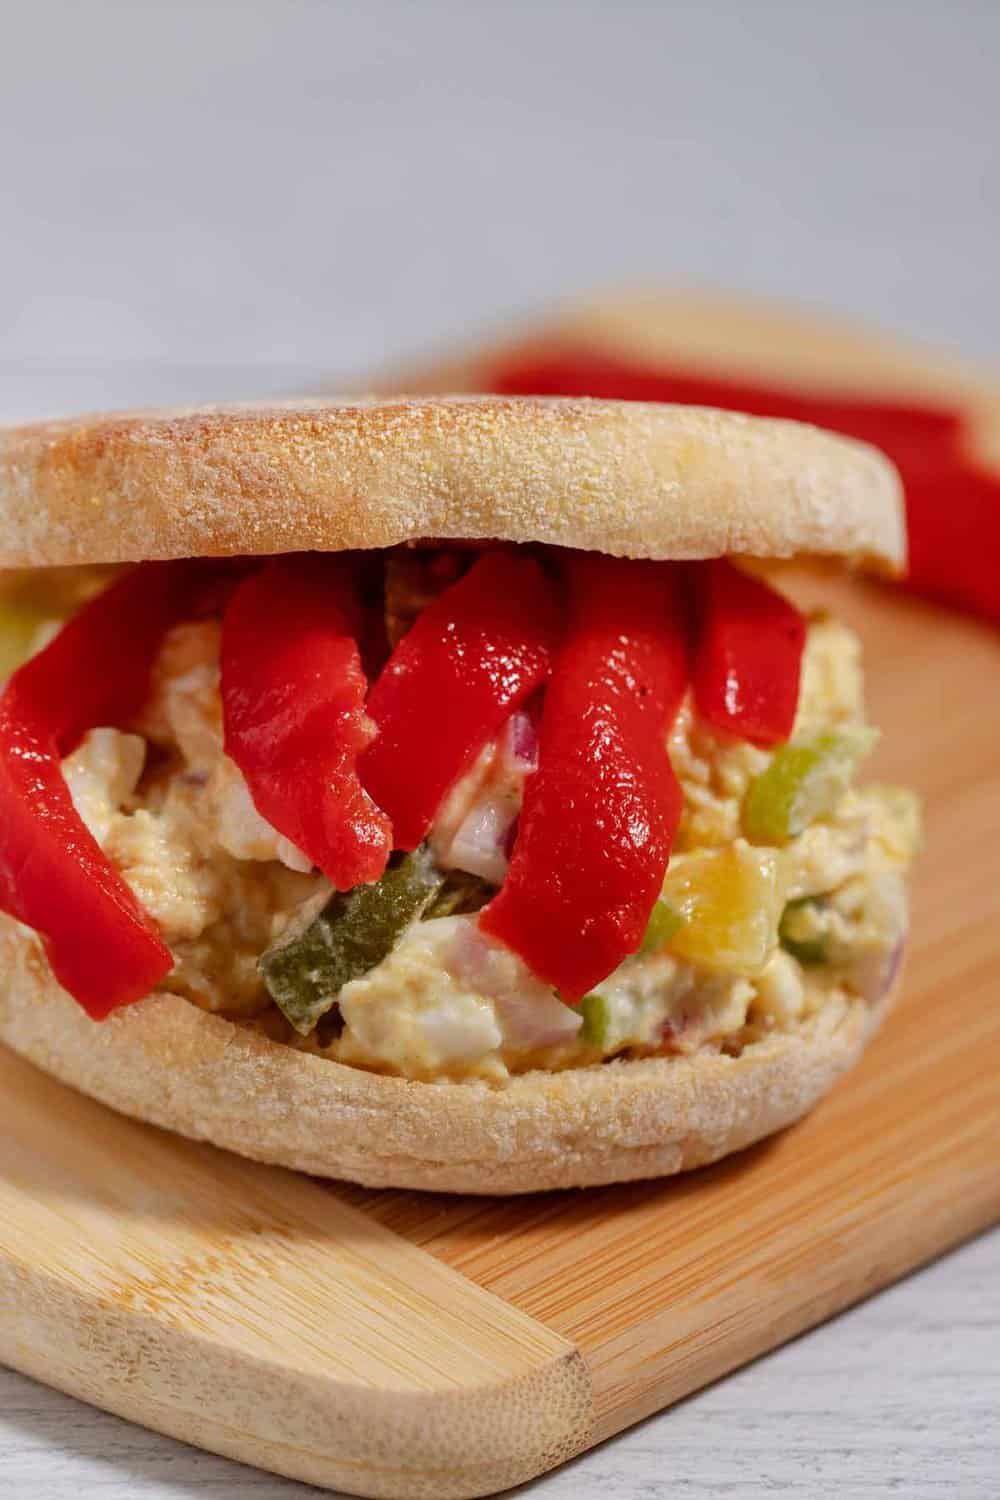 Roasted red peppers on a chicken salad sandwich.